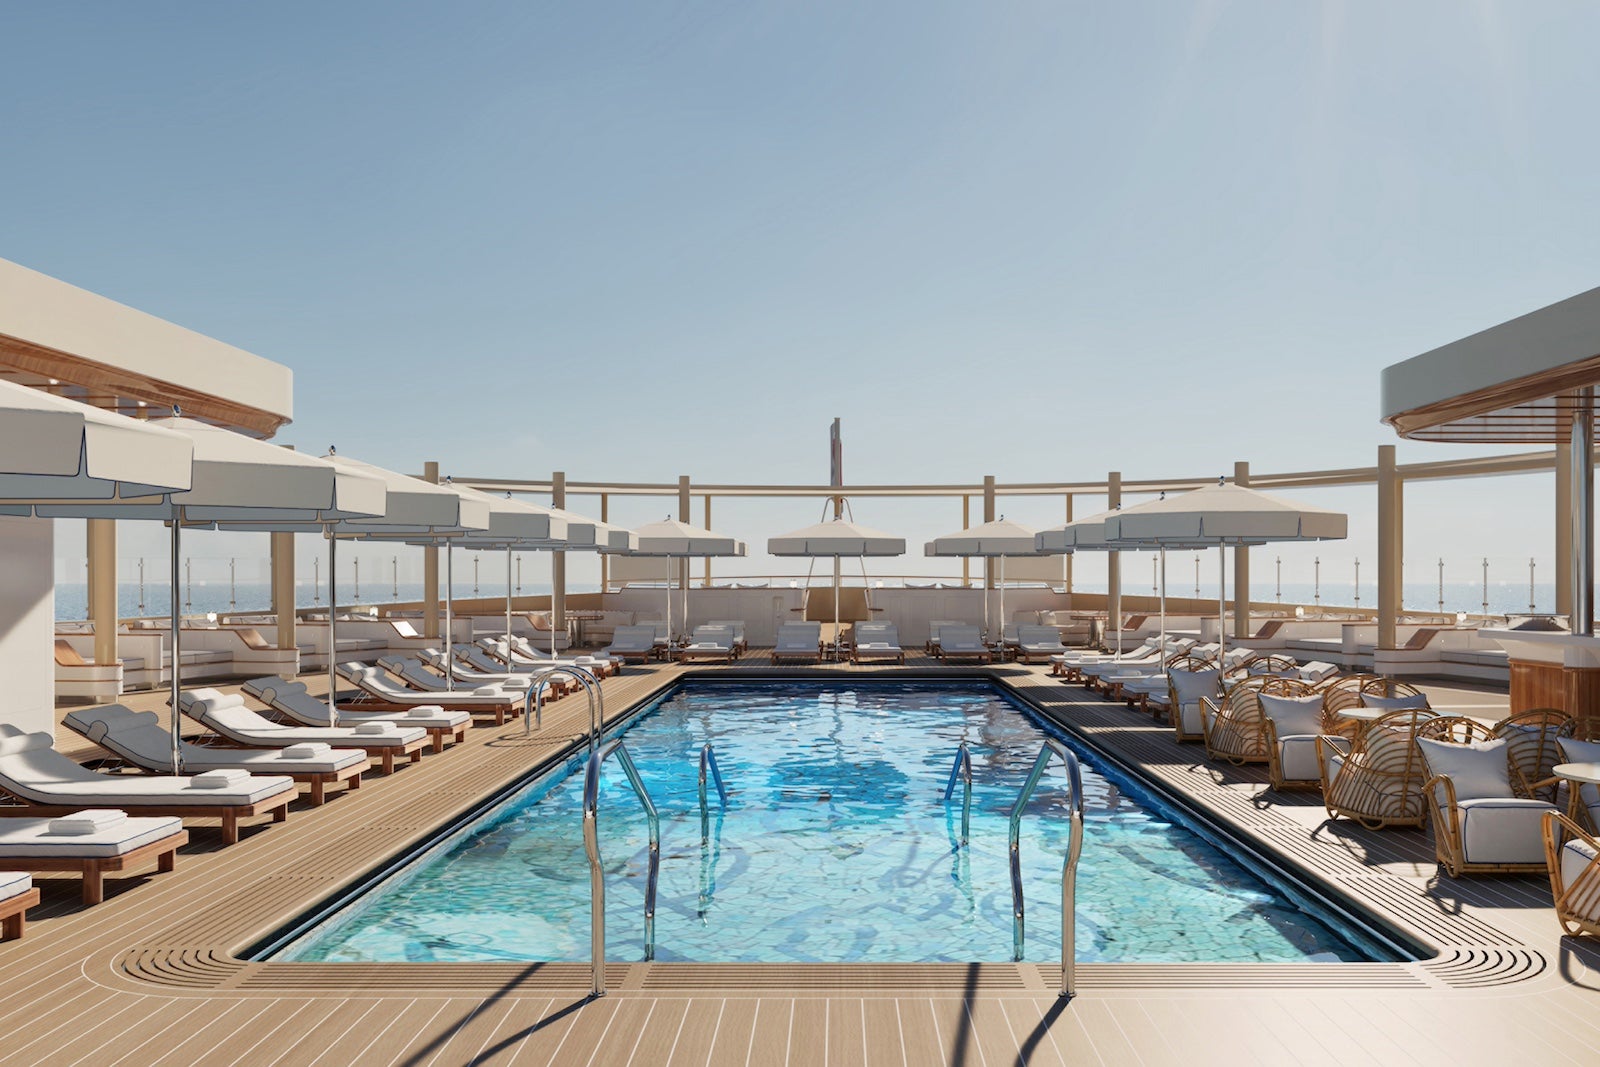 a rendering of a cruise ship pool surrounded by chairs and umbrellas